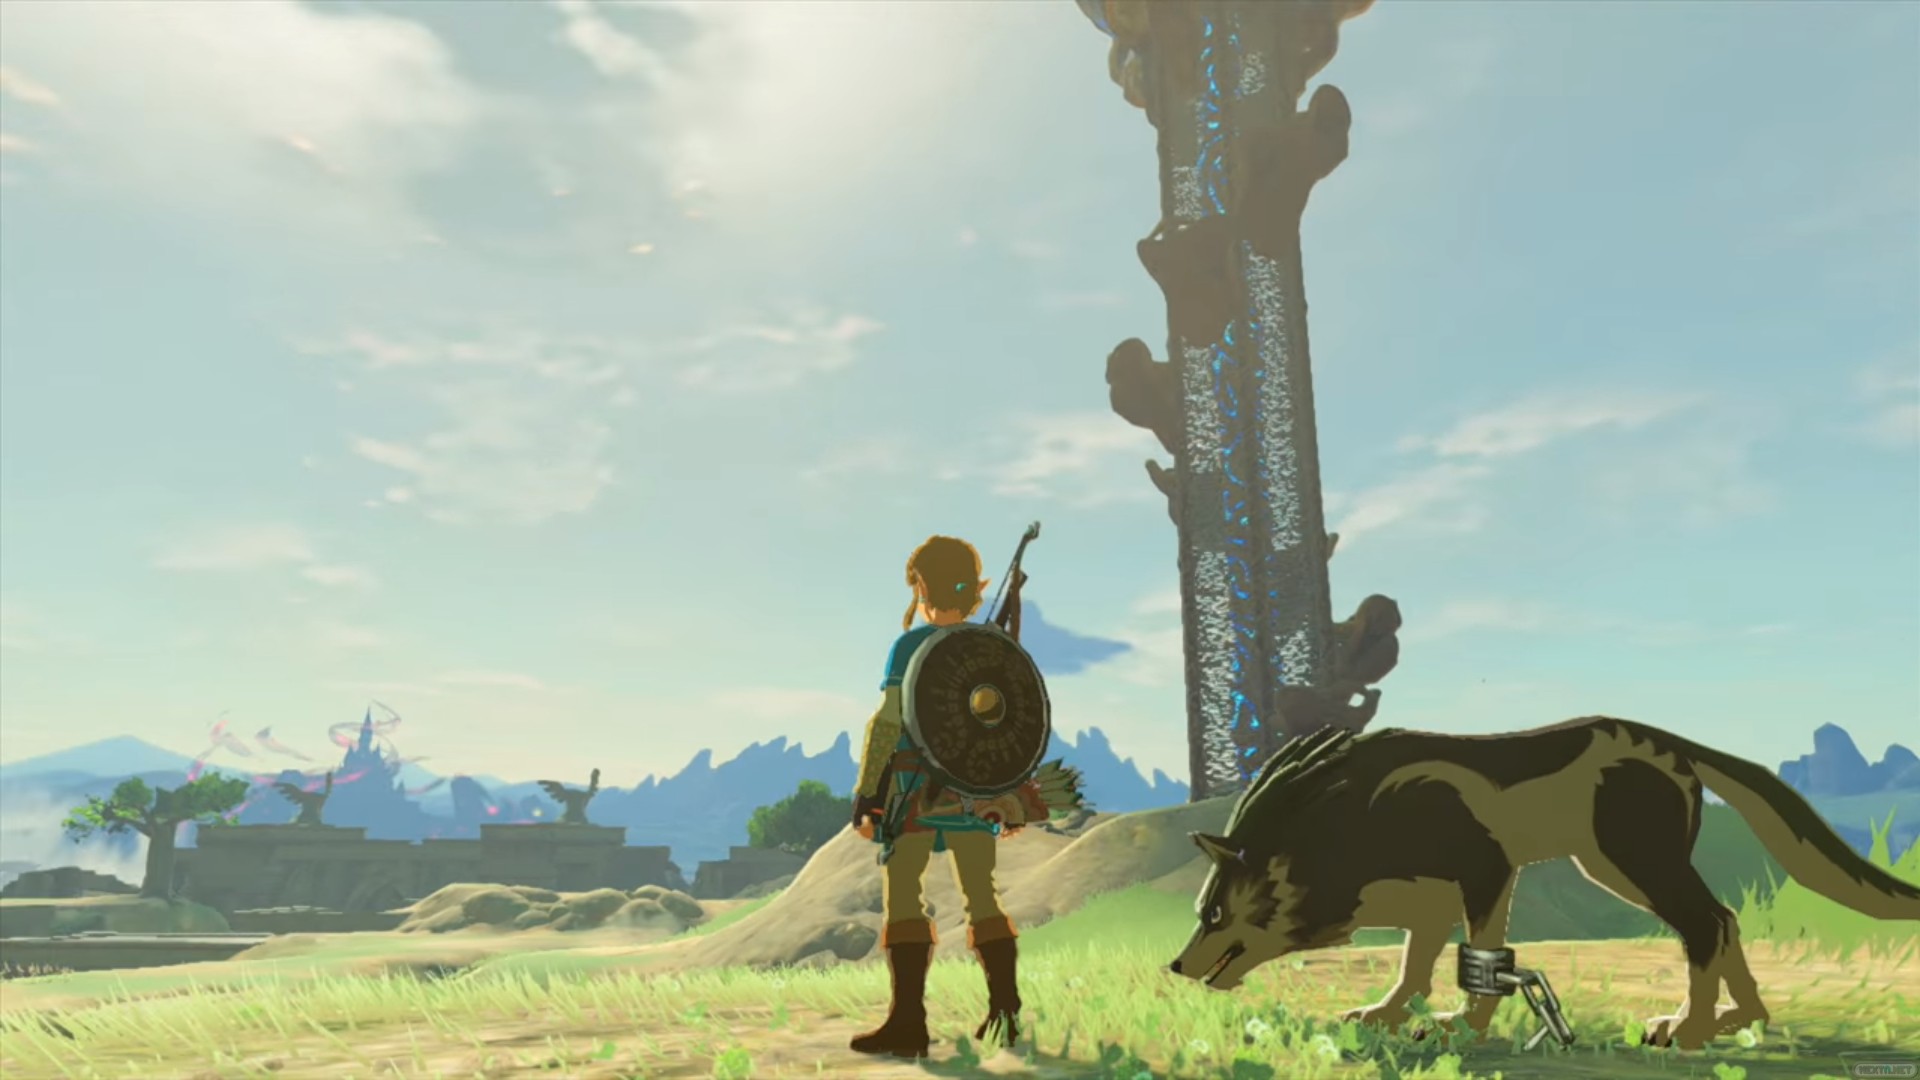 An iconic anime permeates The Legend of Zelda: Breath of the Wild ...